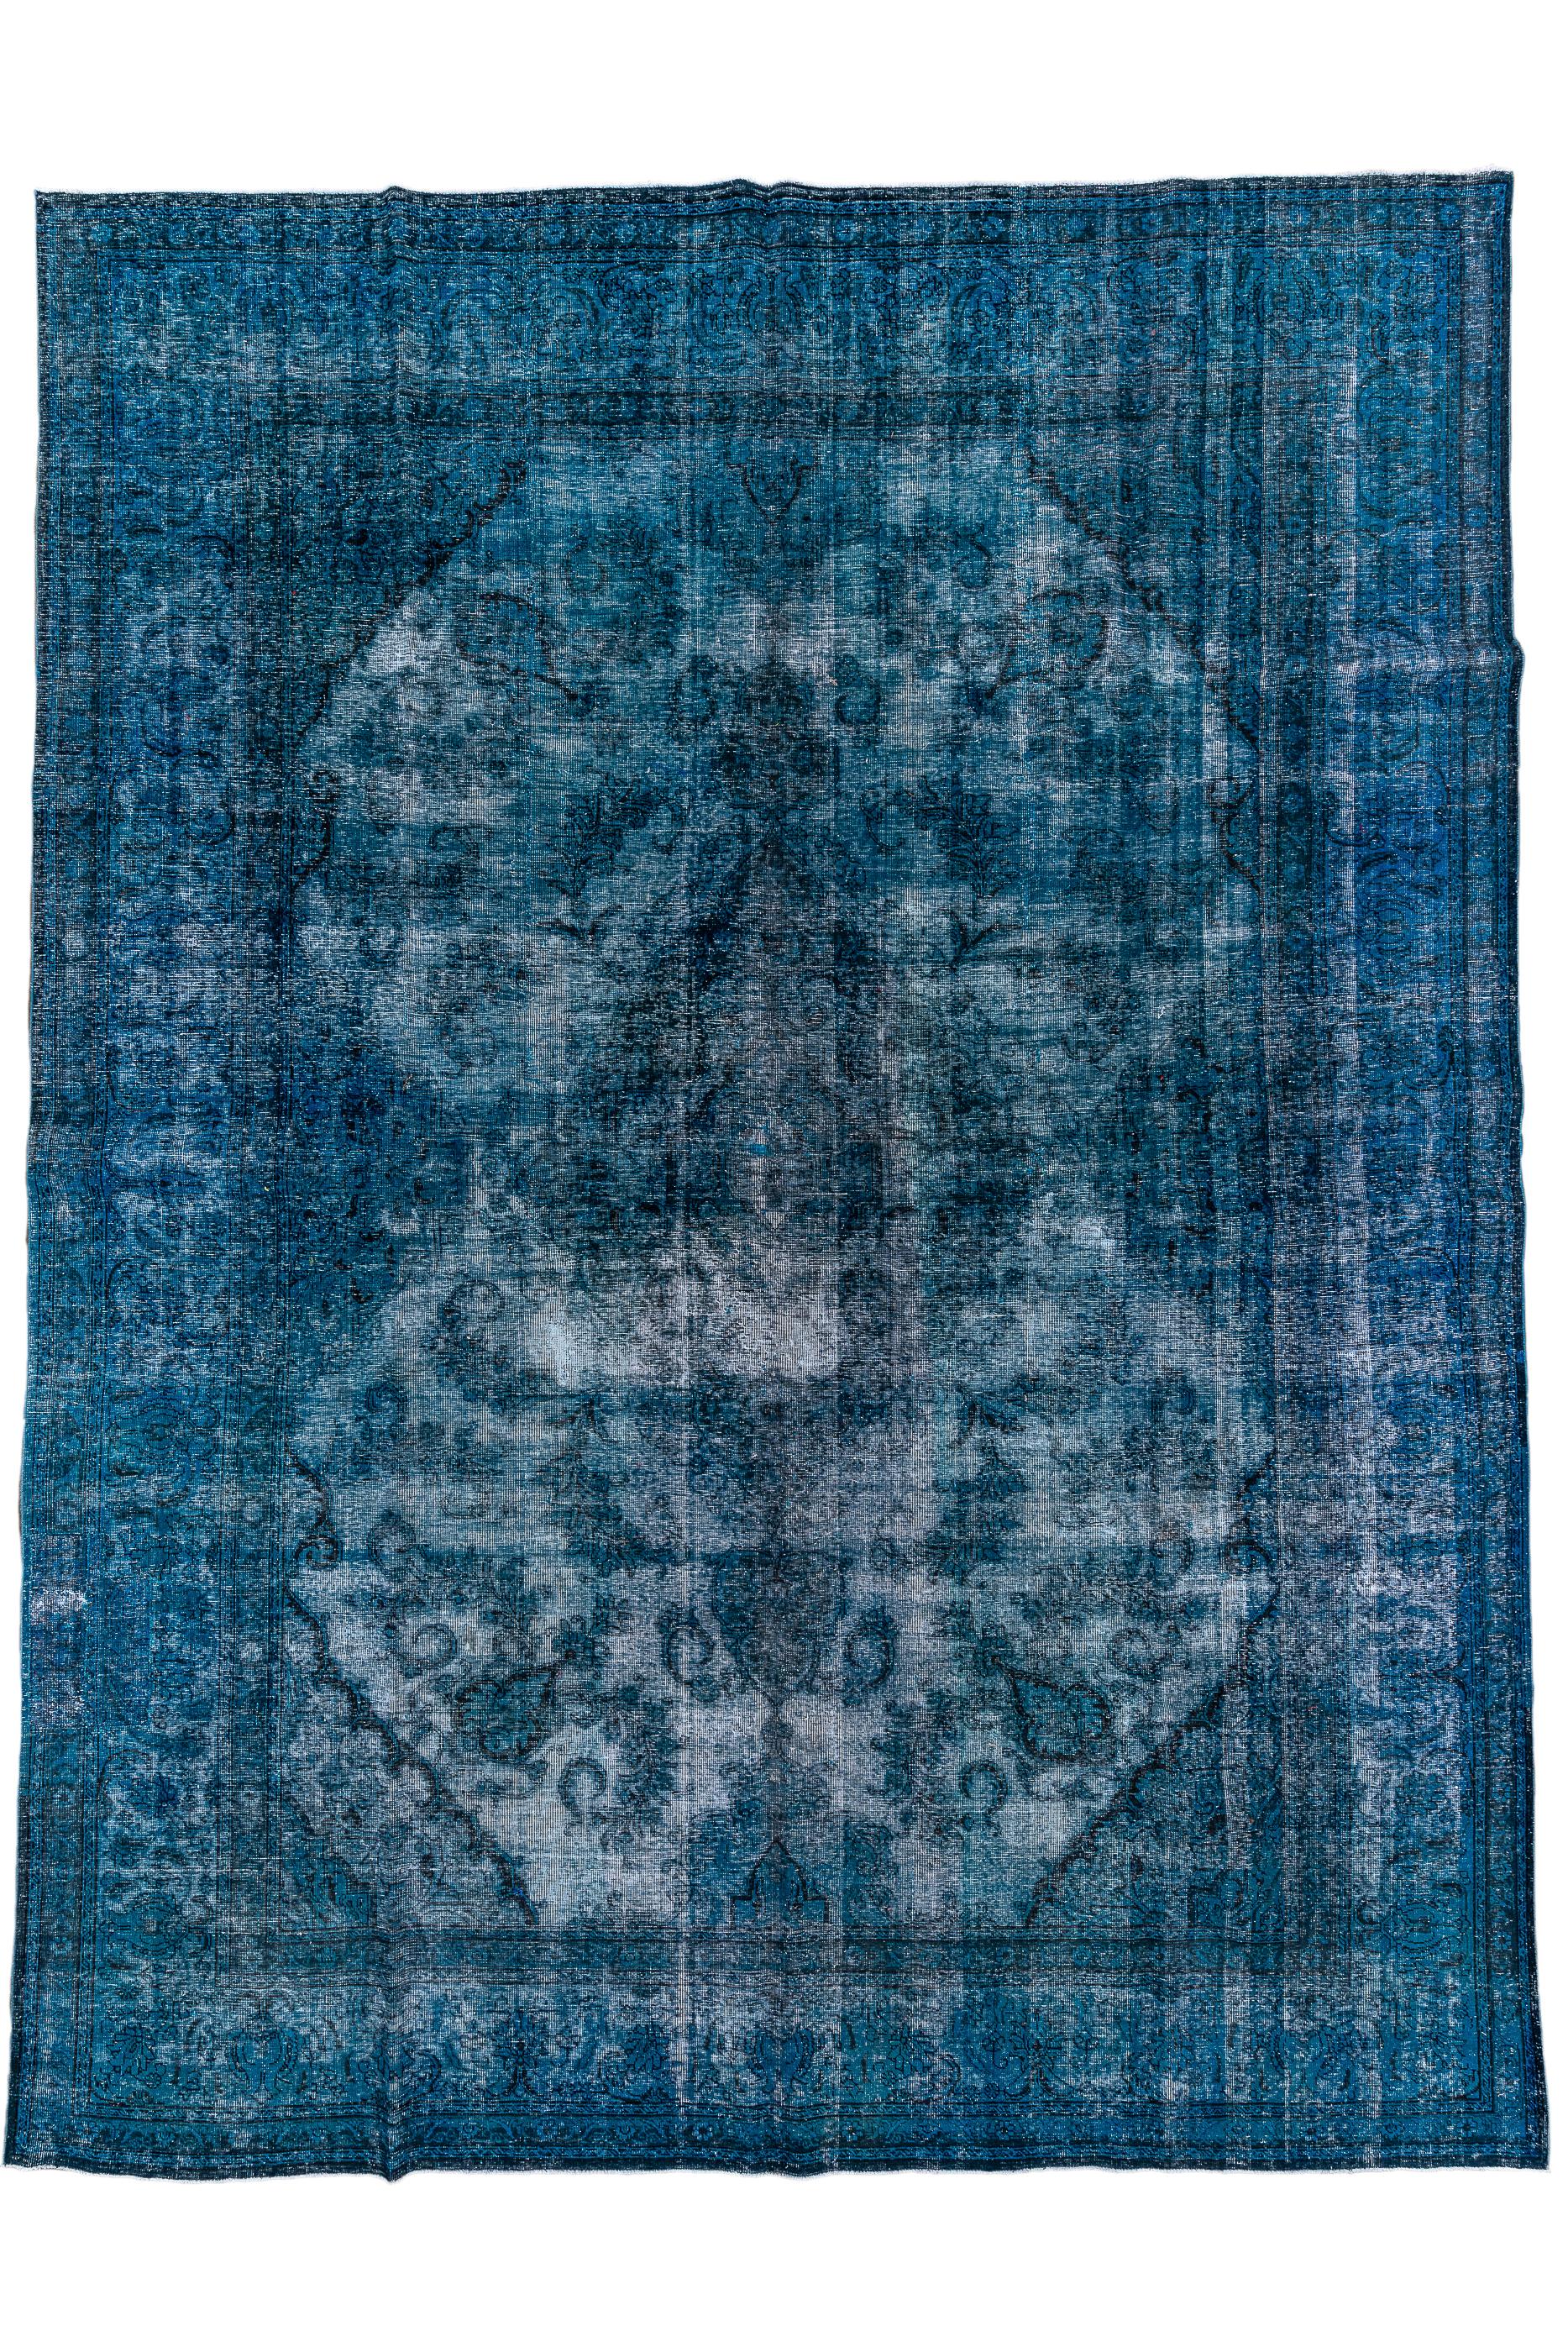 The white foundation made visible by the extreme distress show up as an additional colour besides the shades of blue and red. Intentional distress is a recent innovation. The field is basically two large octagons within a blue border.

Rug